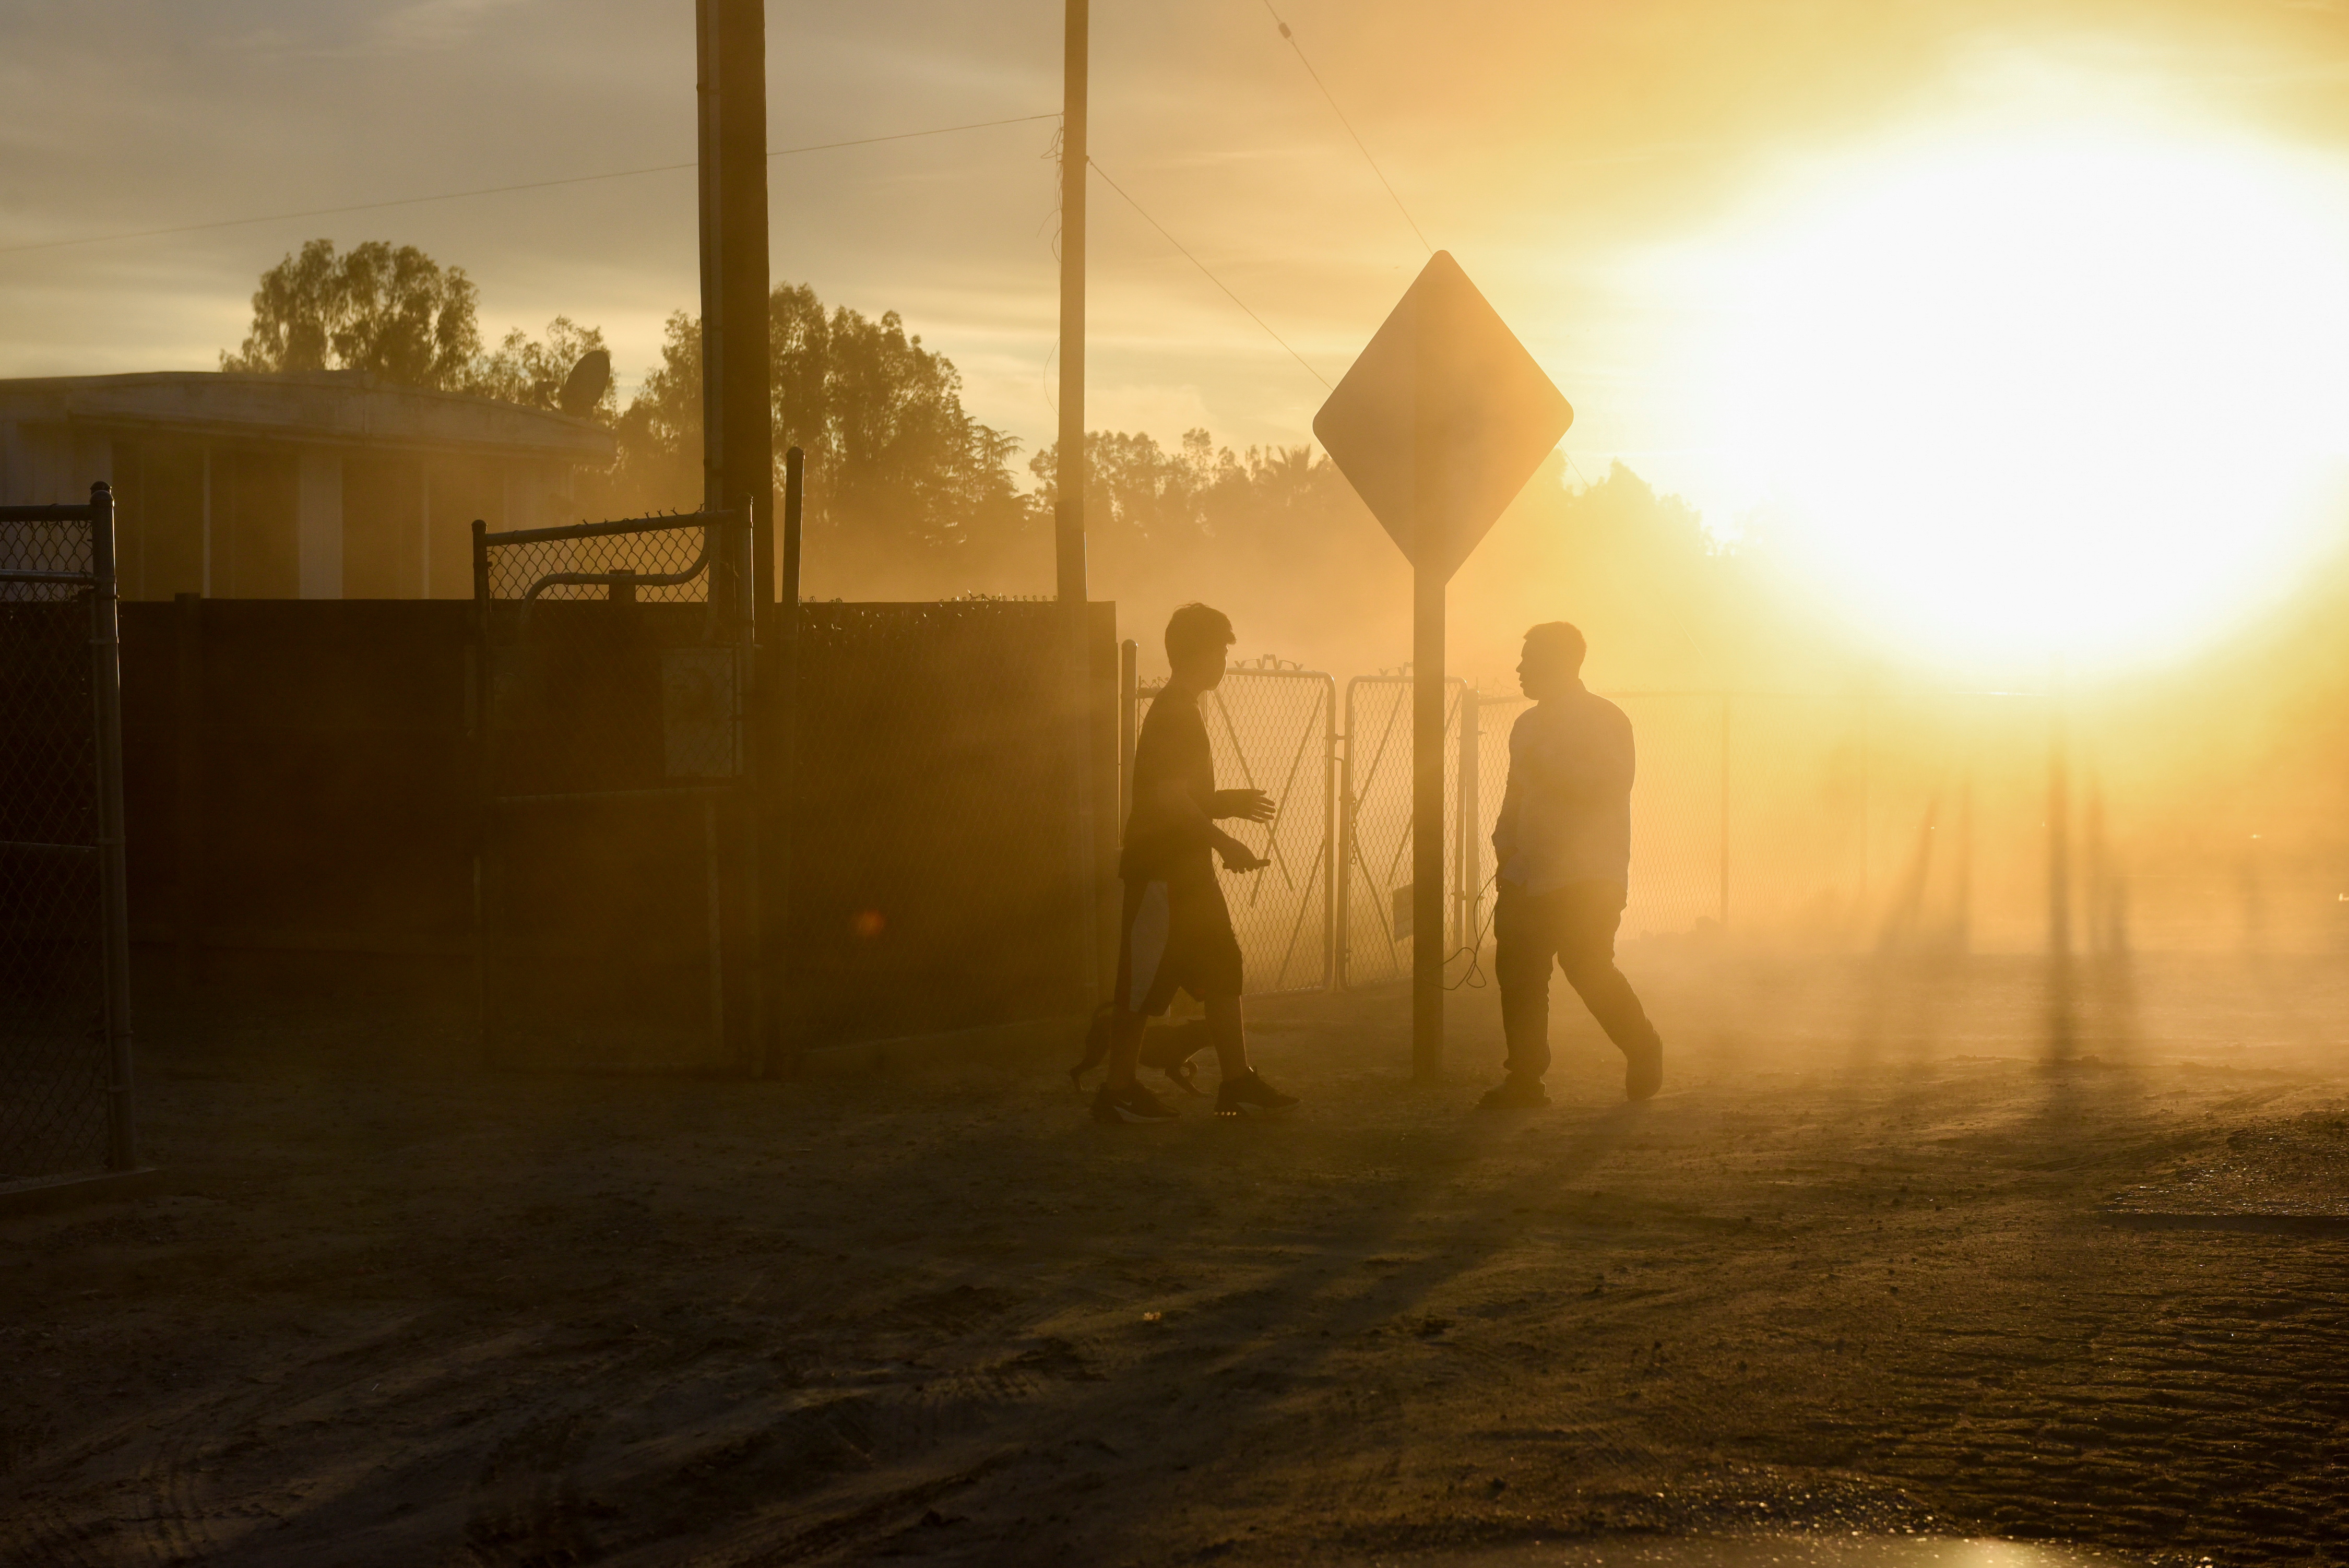 Two young people greet each other at sunset in Teviston, California, U.S., October 20, 2021.  REUTERS/Stephanie Keith